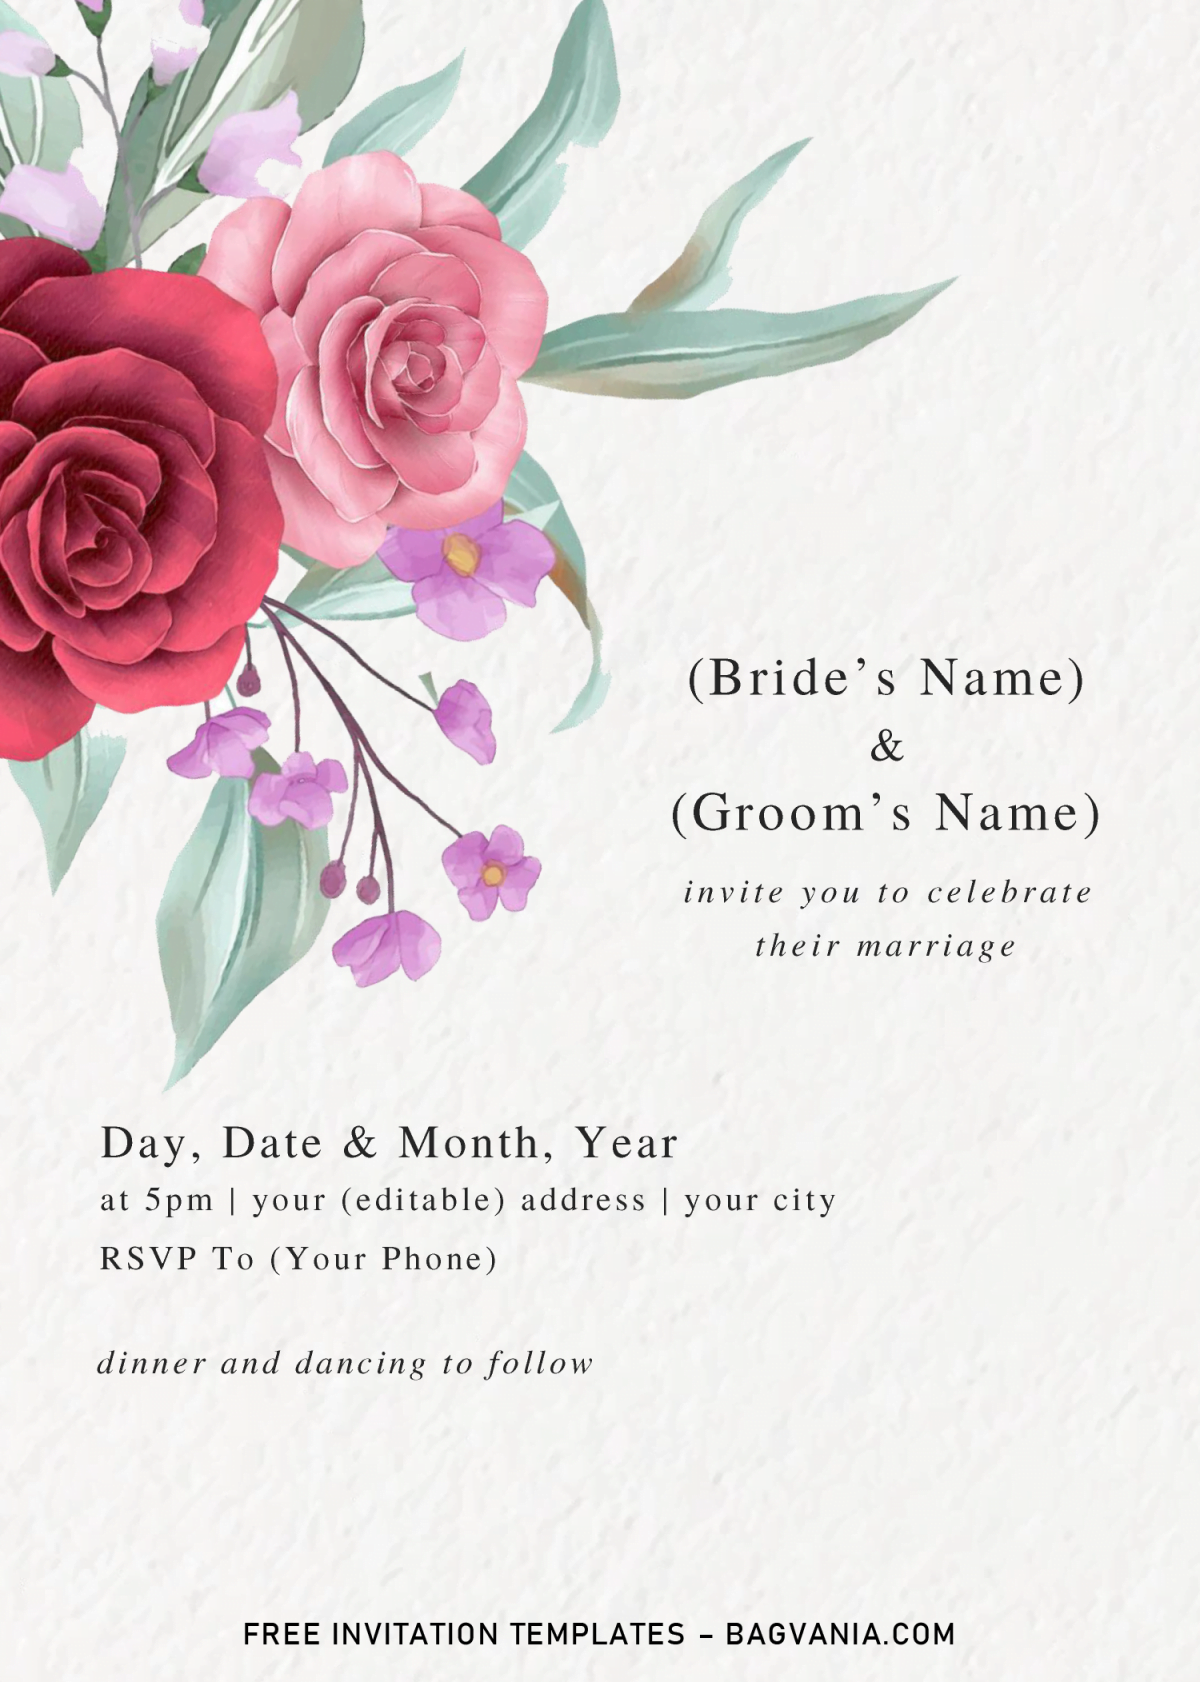 Floral And Greenery Invitation Templates - Editable With Microsoft Word and has 